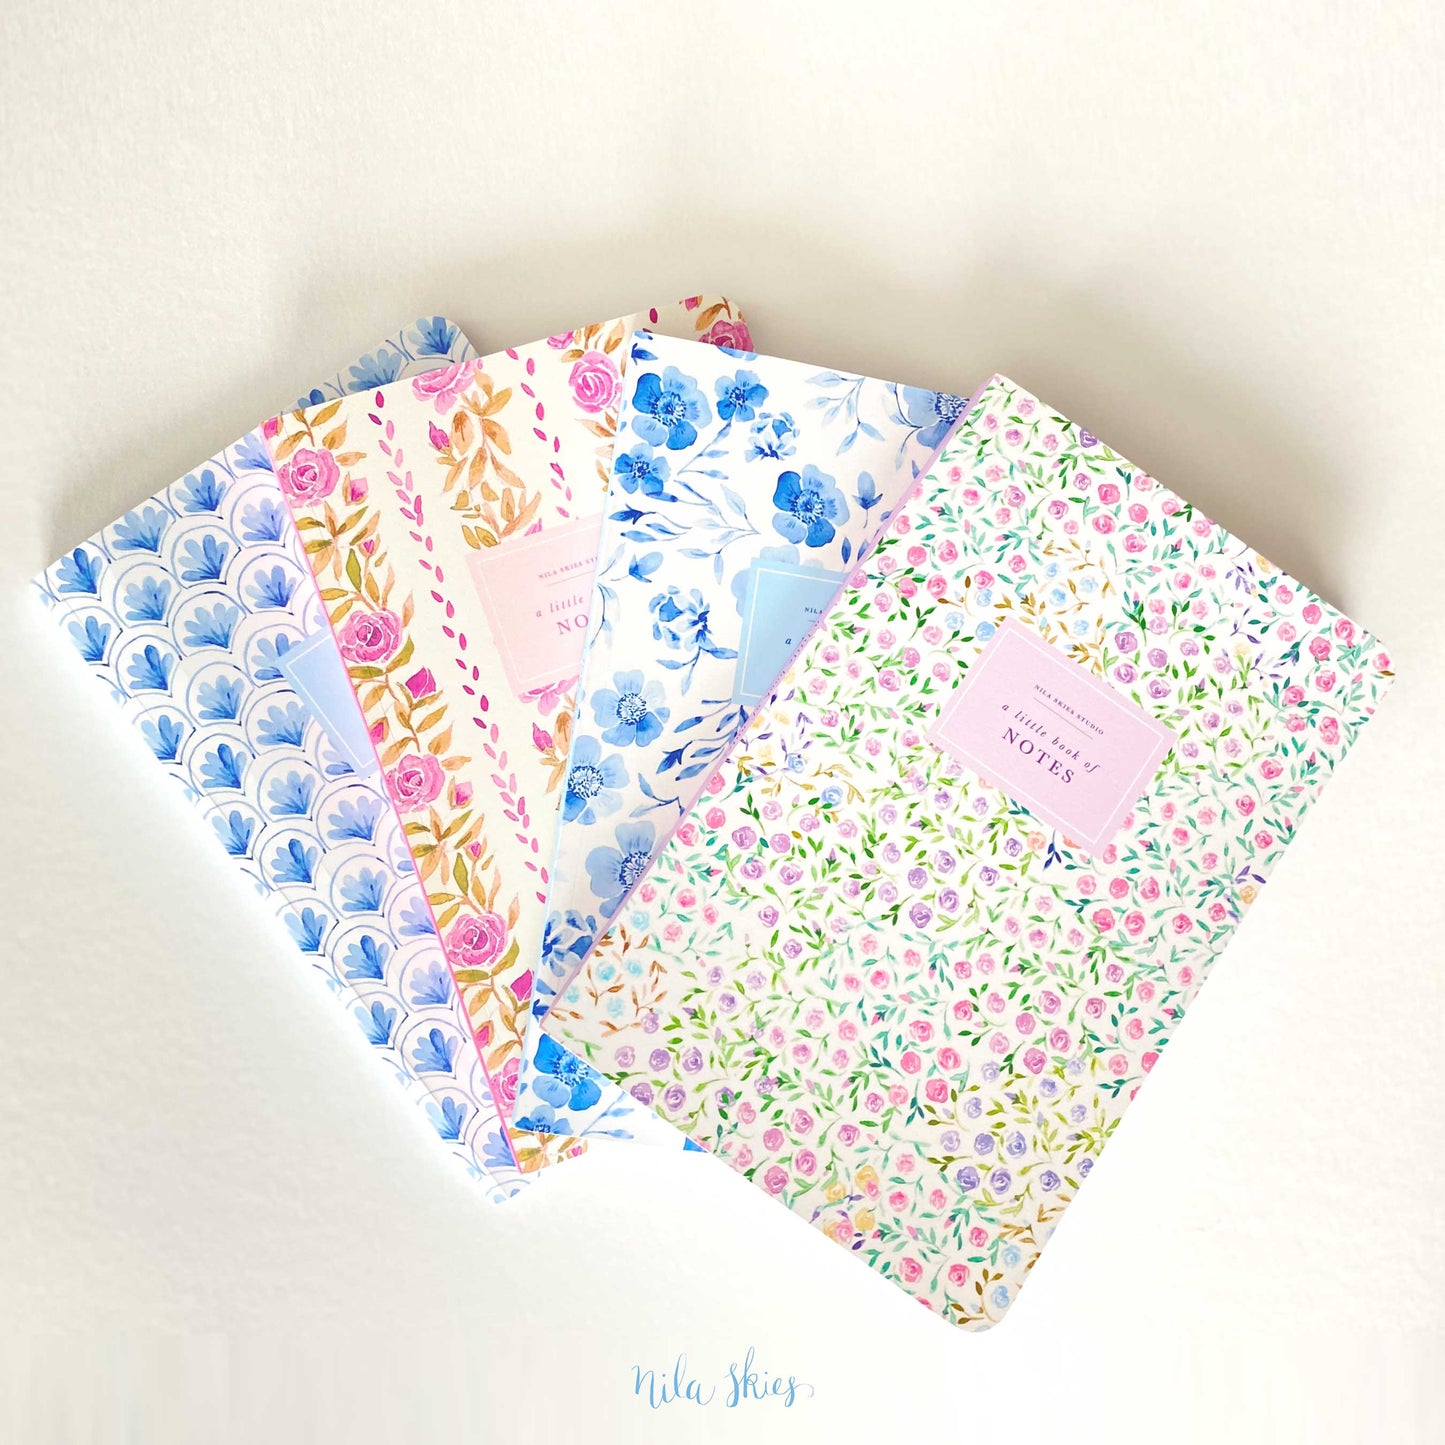 Colorful Watercolor Floral Notebook